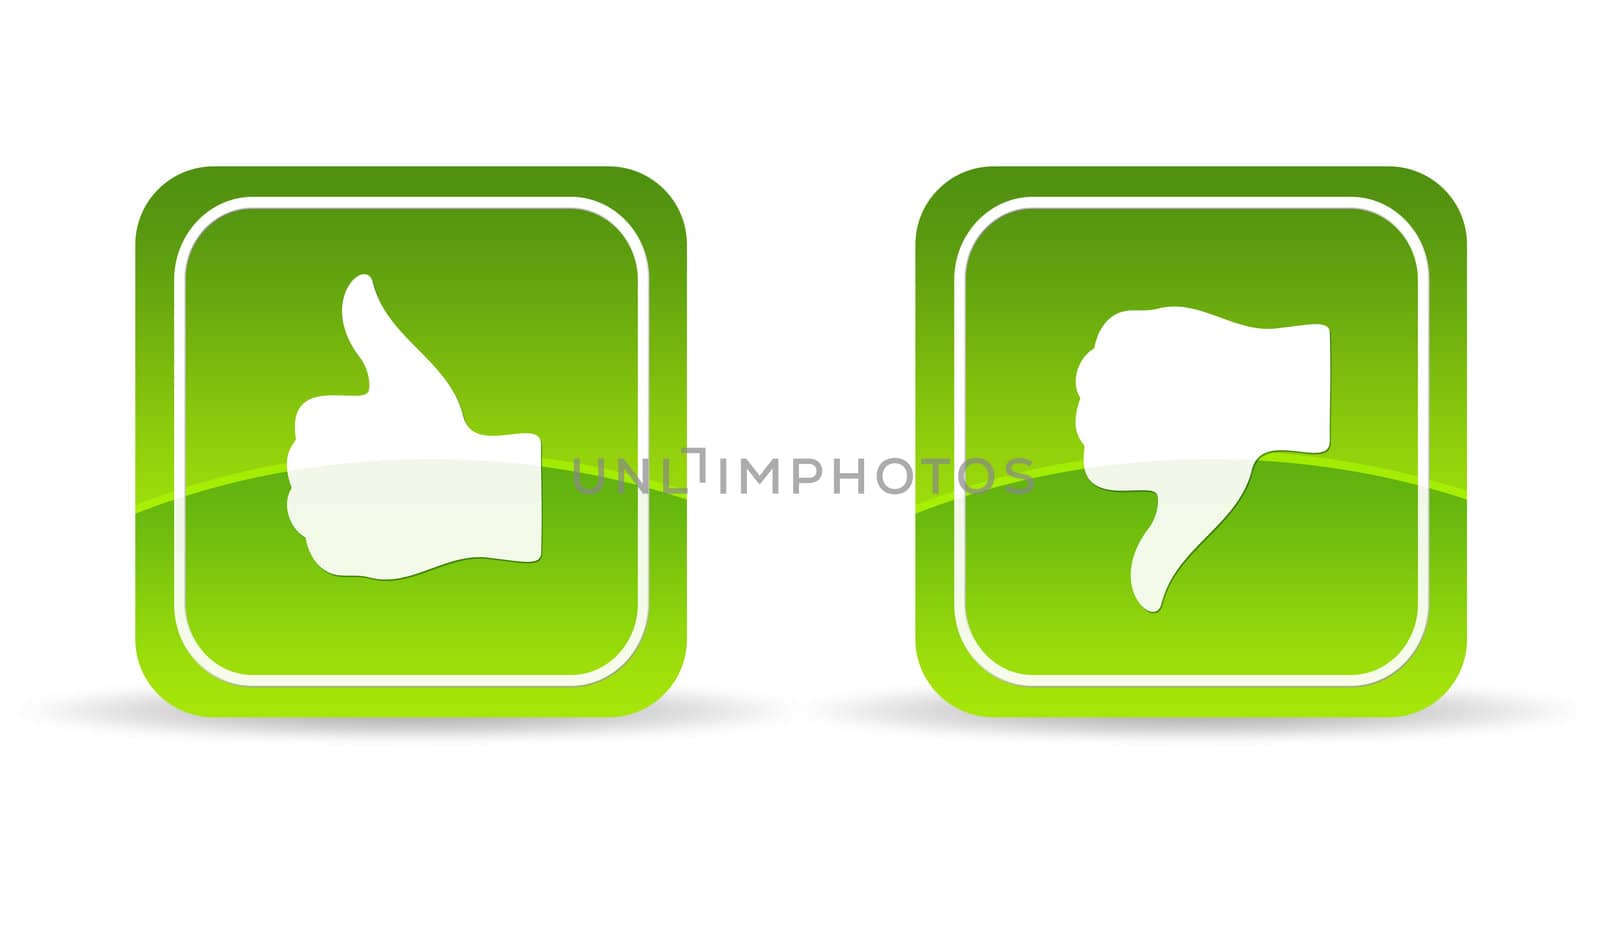 High resolution green thumbs up and down Icon on white background.